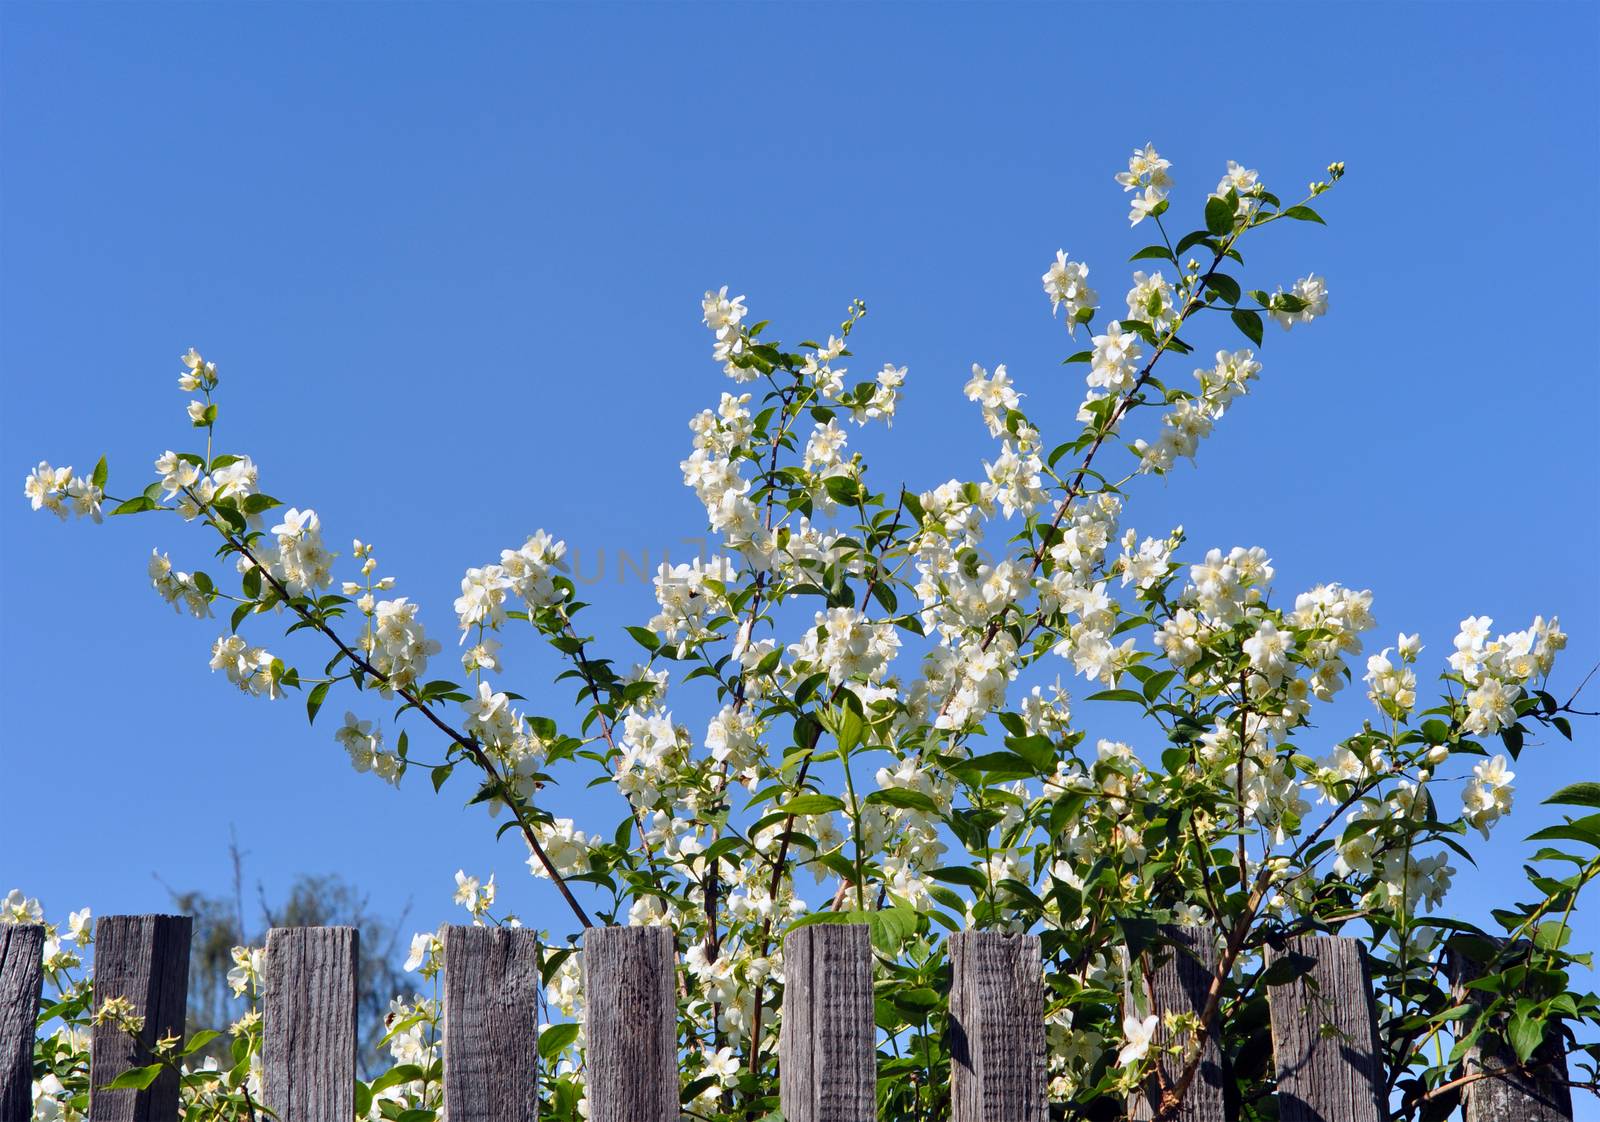 Blossoming apple tree over a wooden fence against the blue sky, May, Central Russia